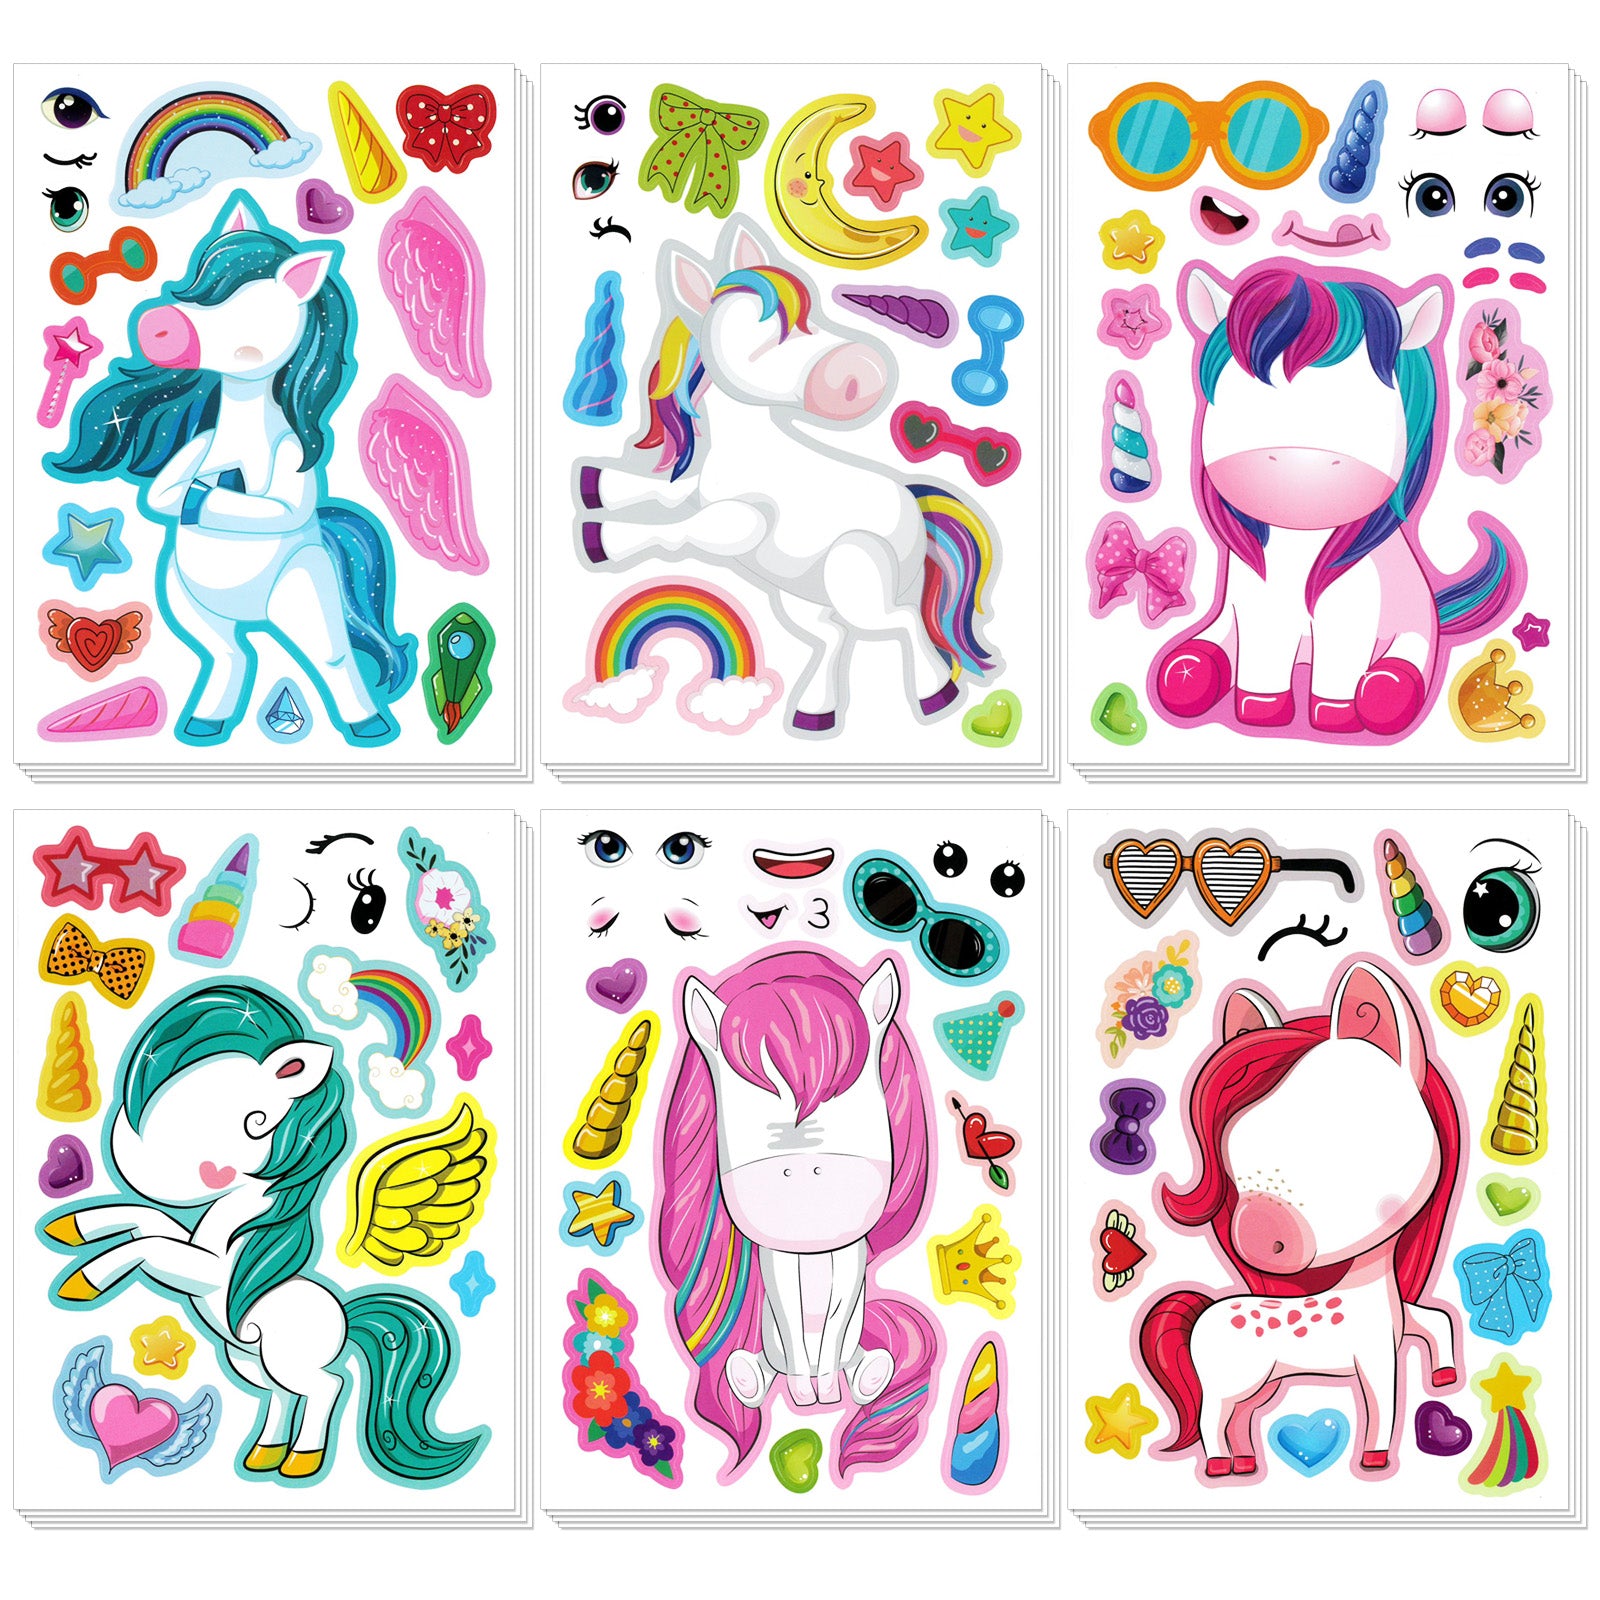 Wrapables Make Your Own Sticker Sheets, DIY Make A Face Animal, Food, Party Favor Stickers (24 Sheets) Unicorns